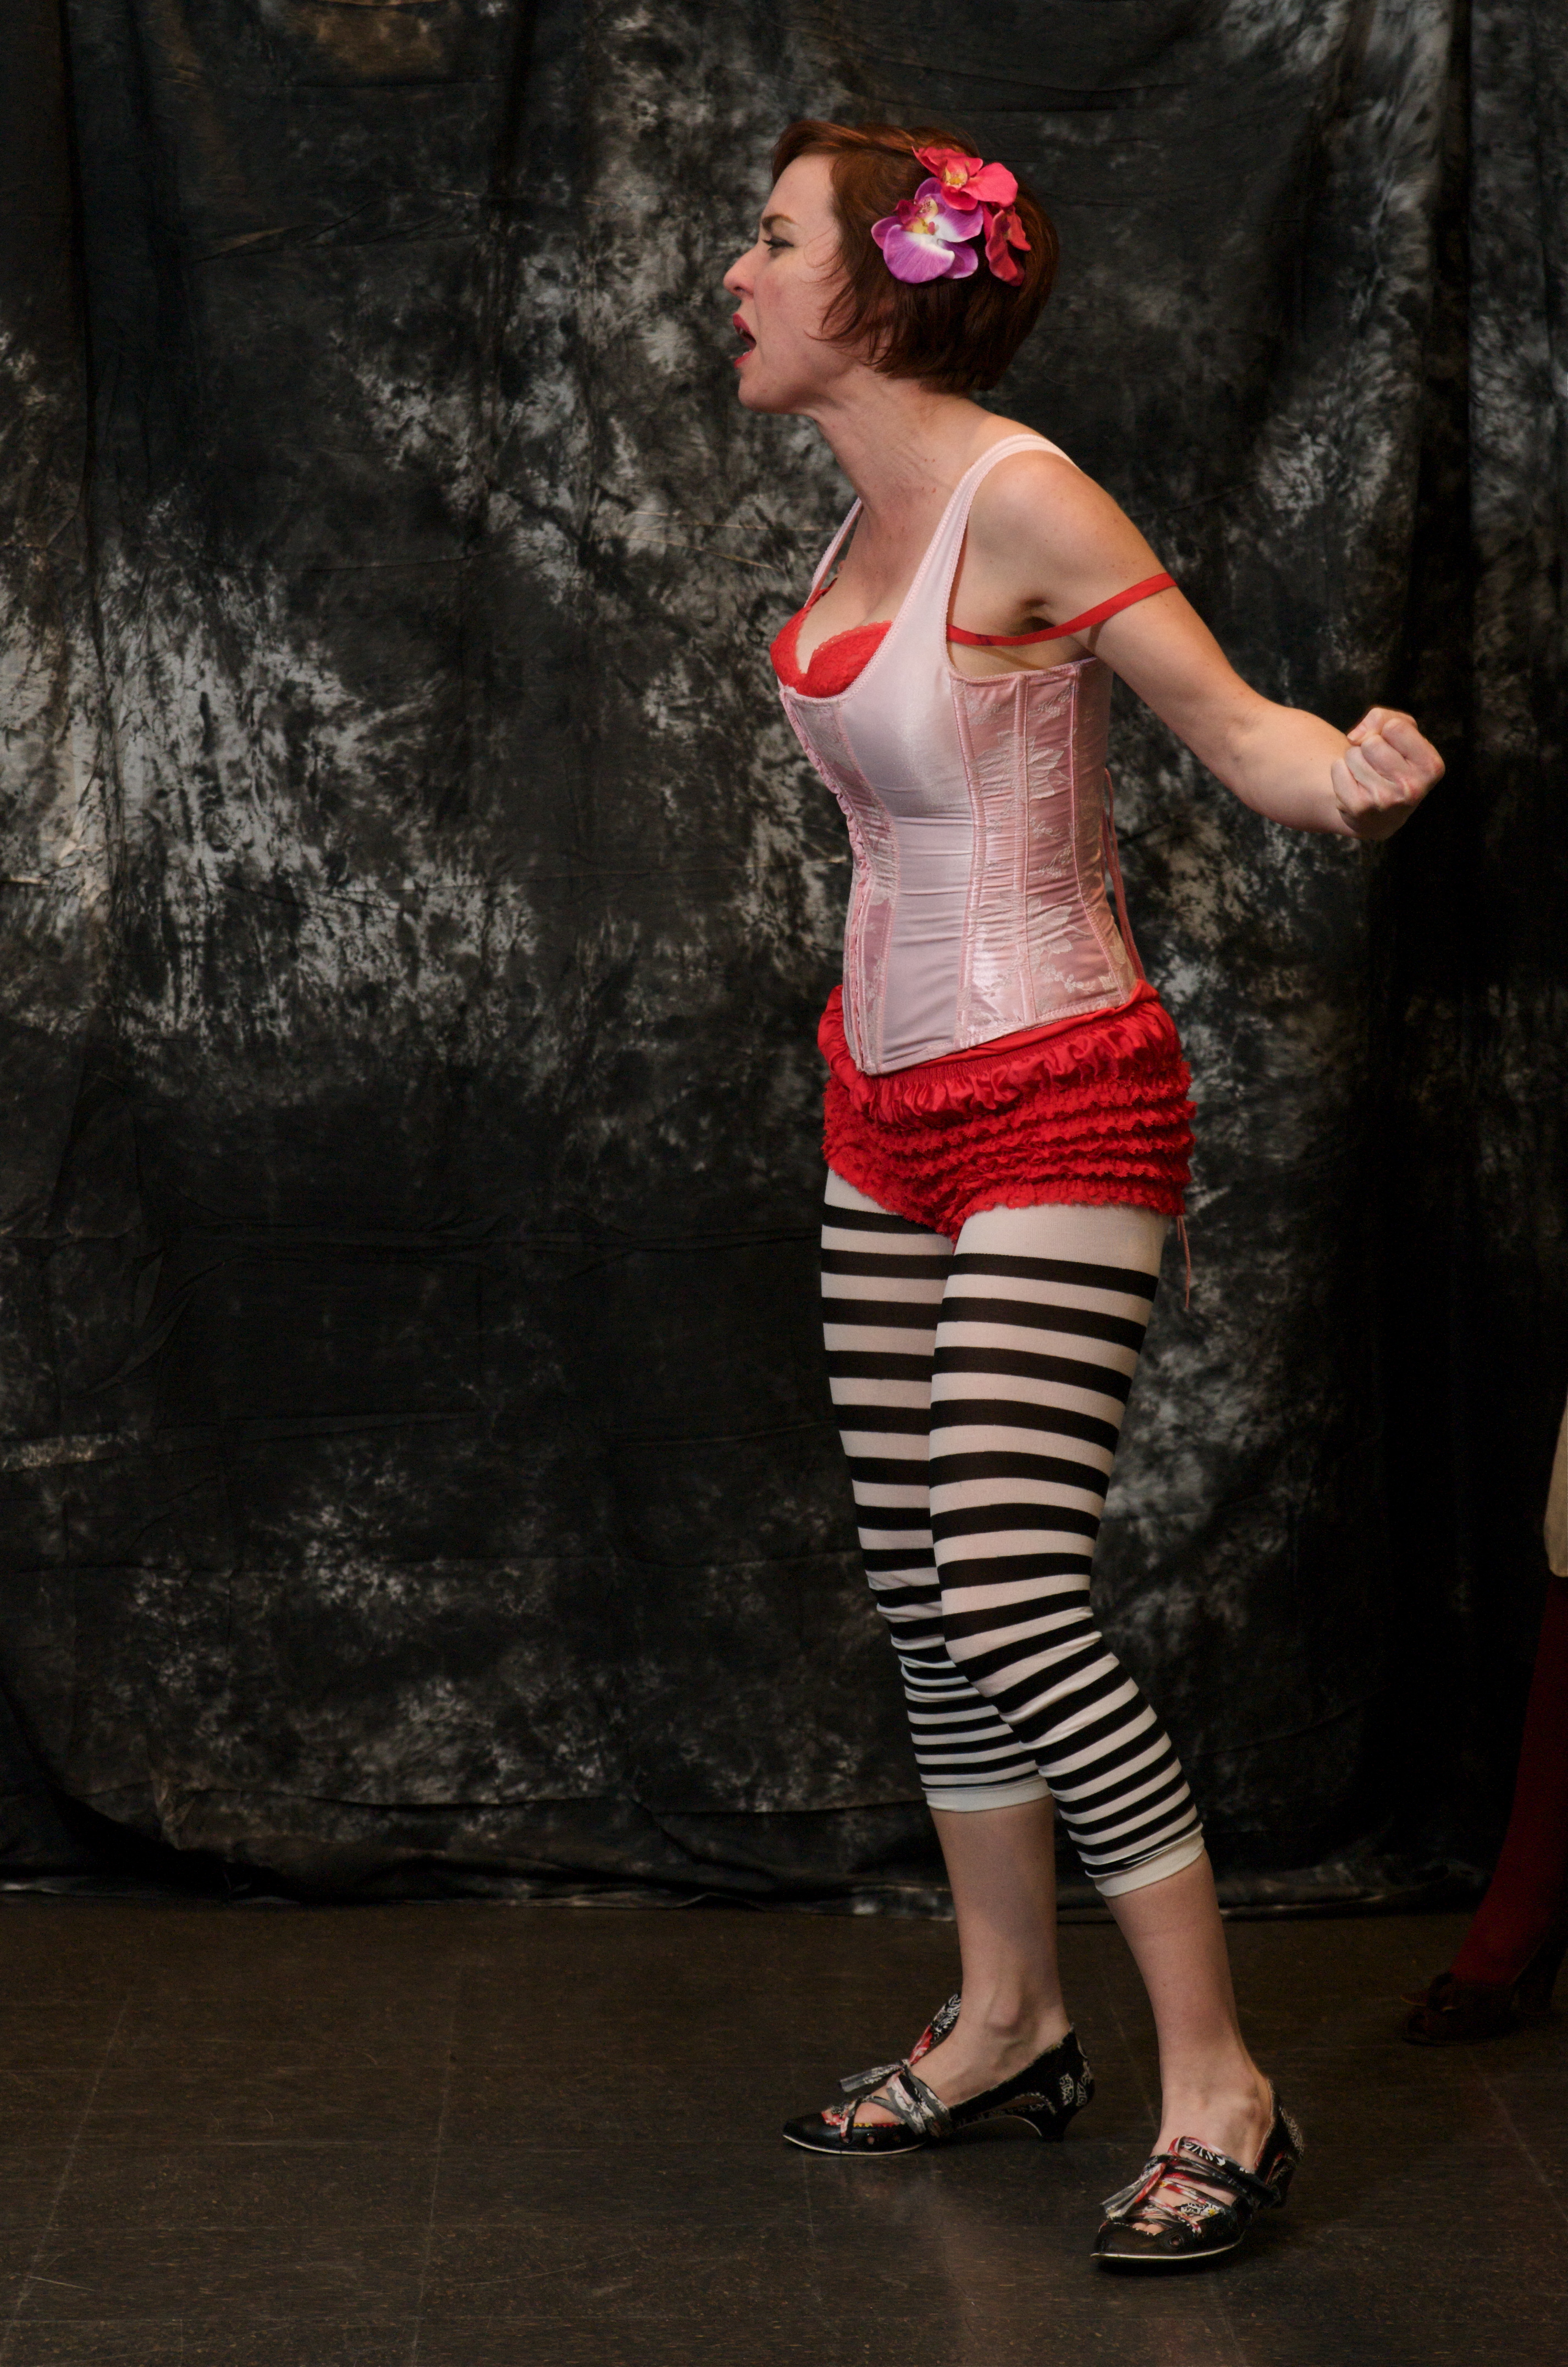 Chaille Stidham as the Formidable Molly Forge in St. Mathilde's Malady, FronteraFest Best of Fest Winner, 2009